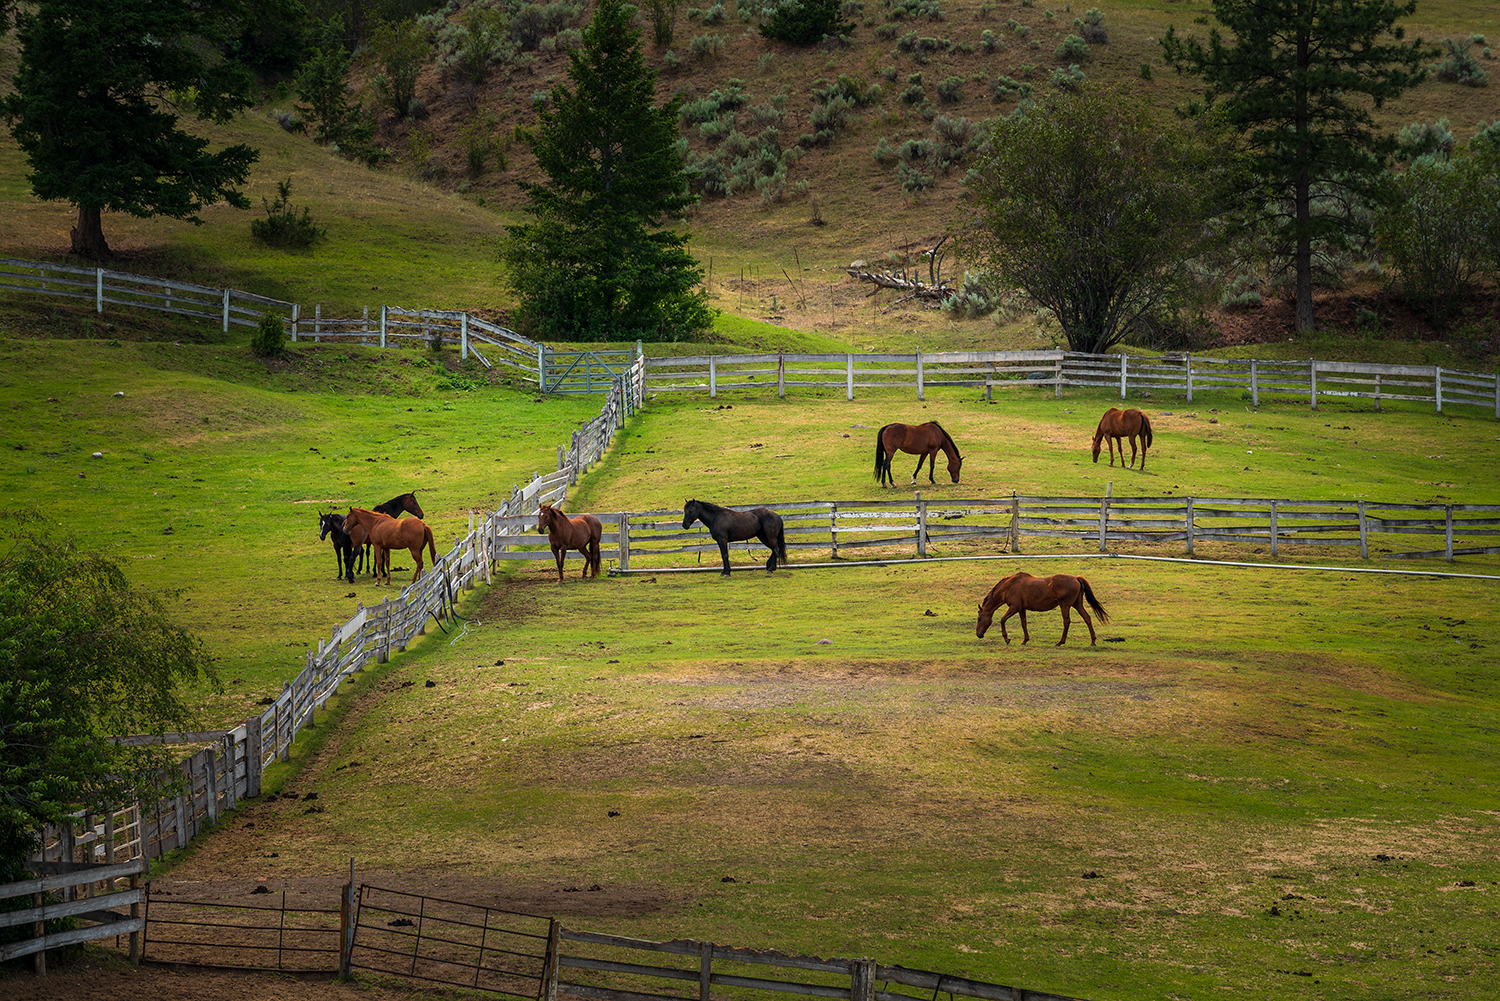 Kamloops rural life ranch with horses in different fences